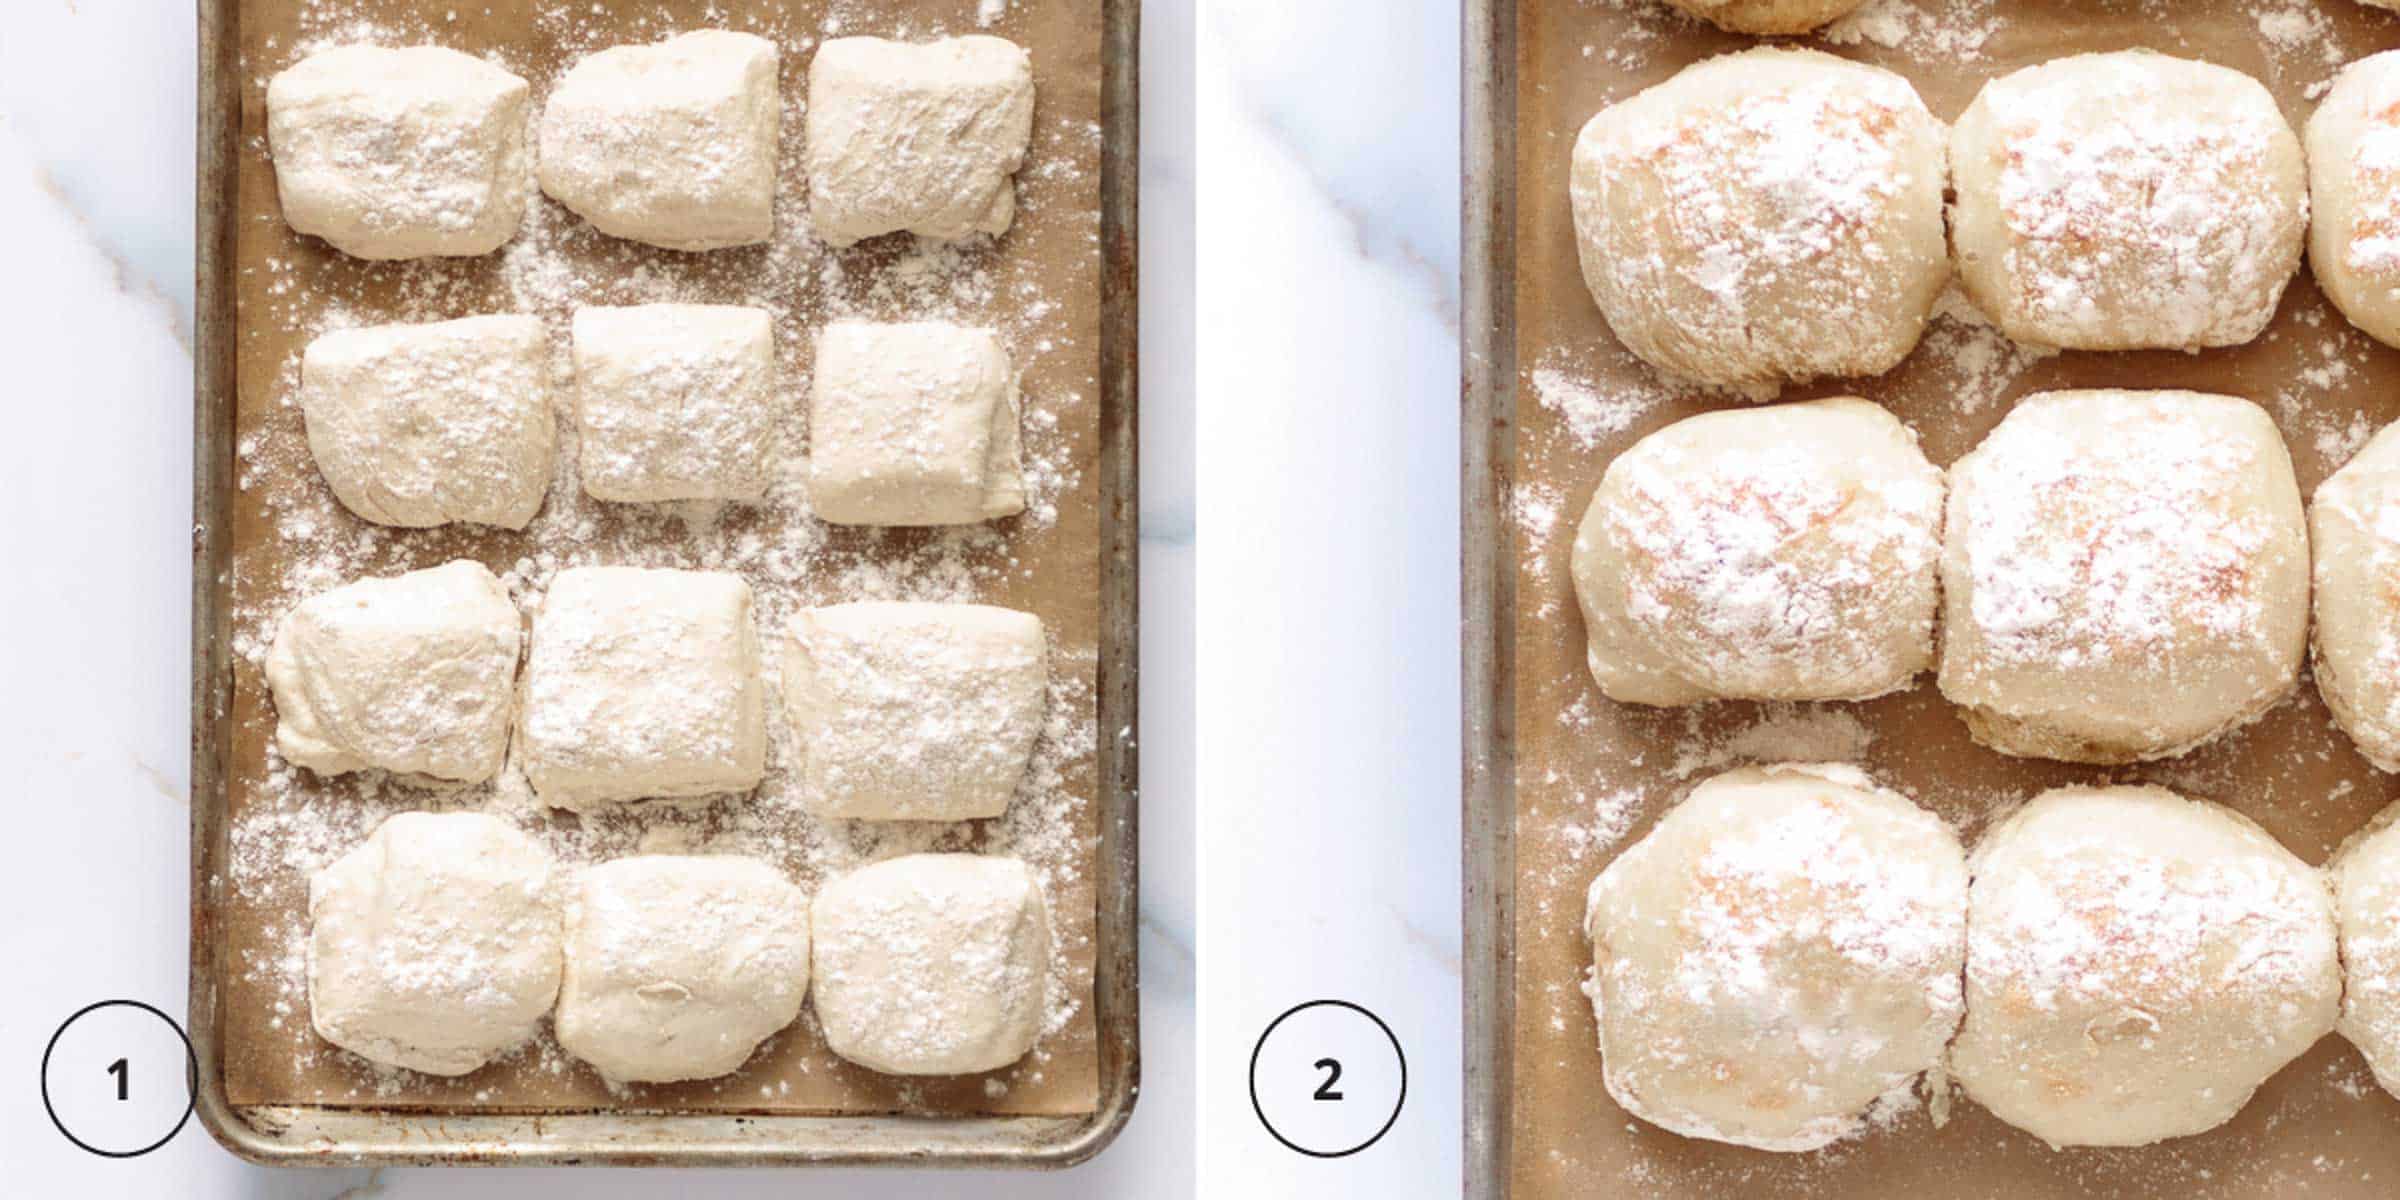 Rise bread until puffy and bake lightly.